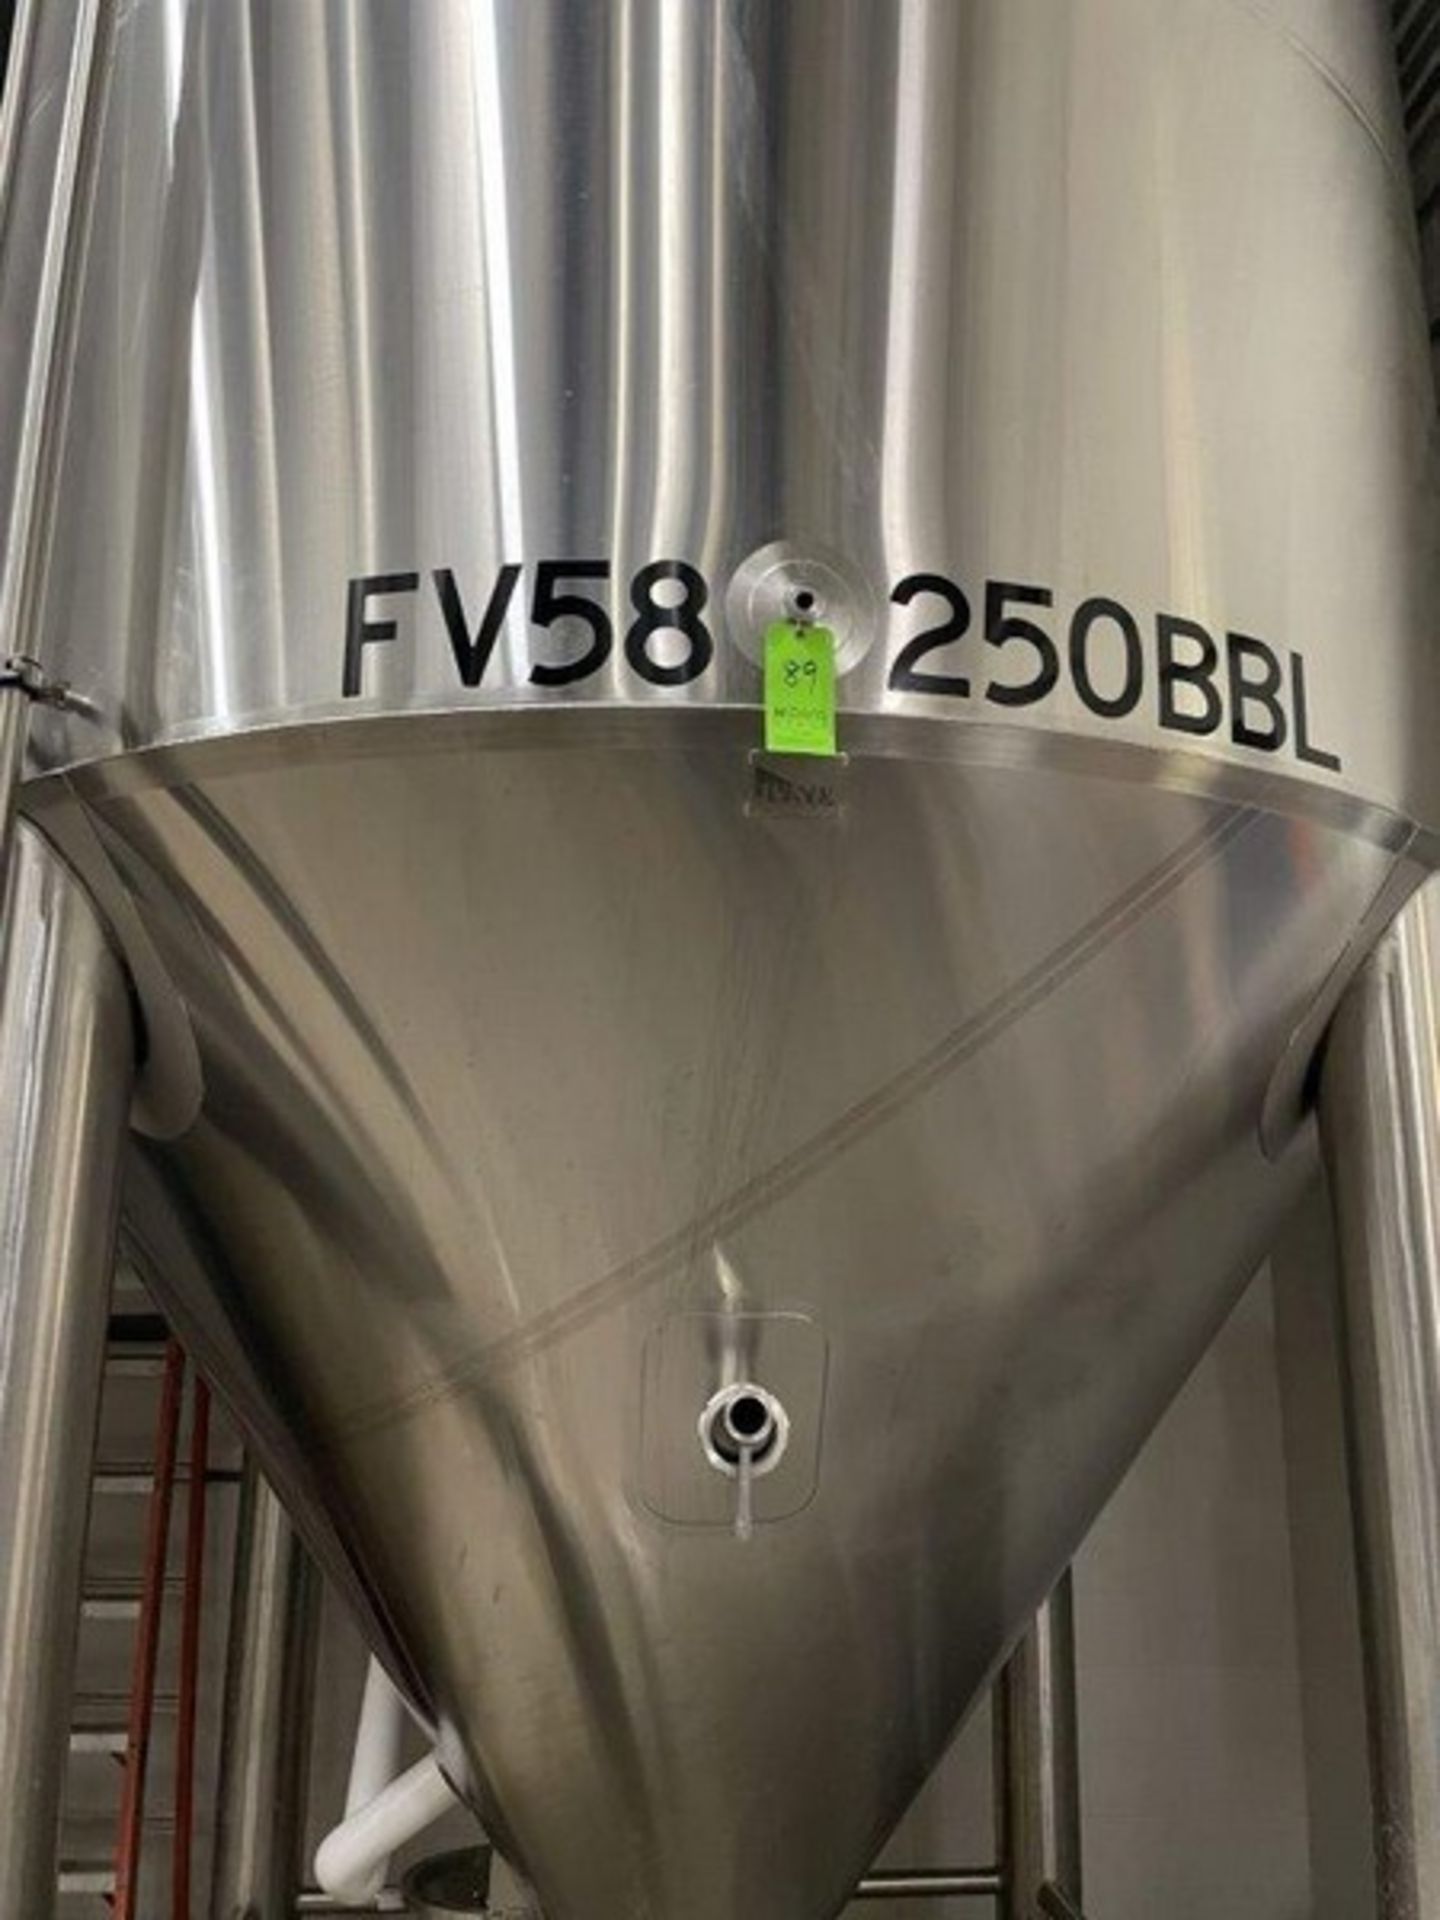 250 BBL (10178 Gallon) Vertical Cone Bottom 304 Stainless Steel Jacketed Vessel. Manufactured by JV - Image 6 of 8